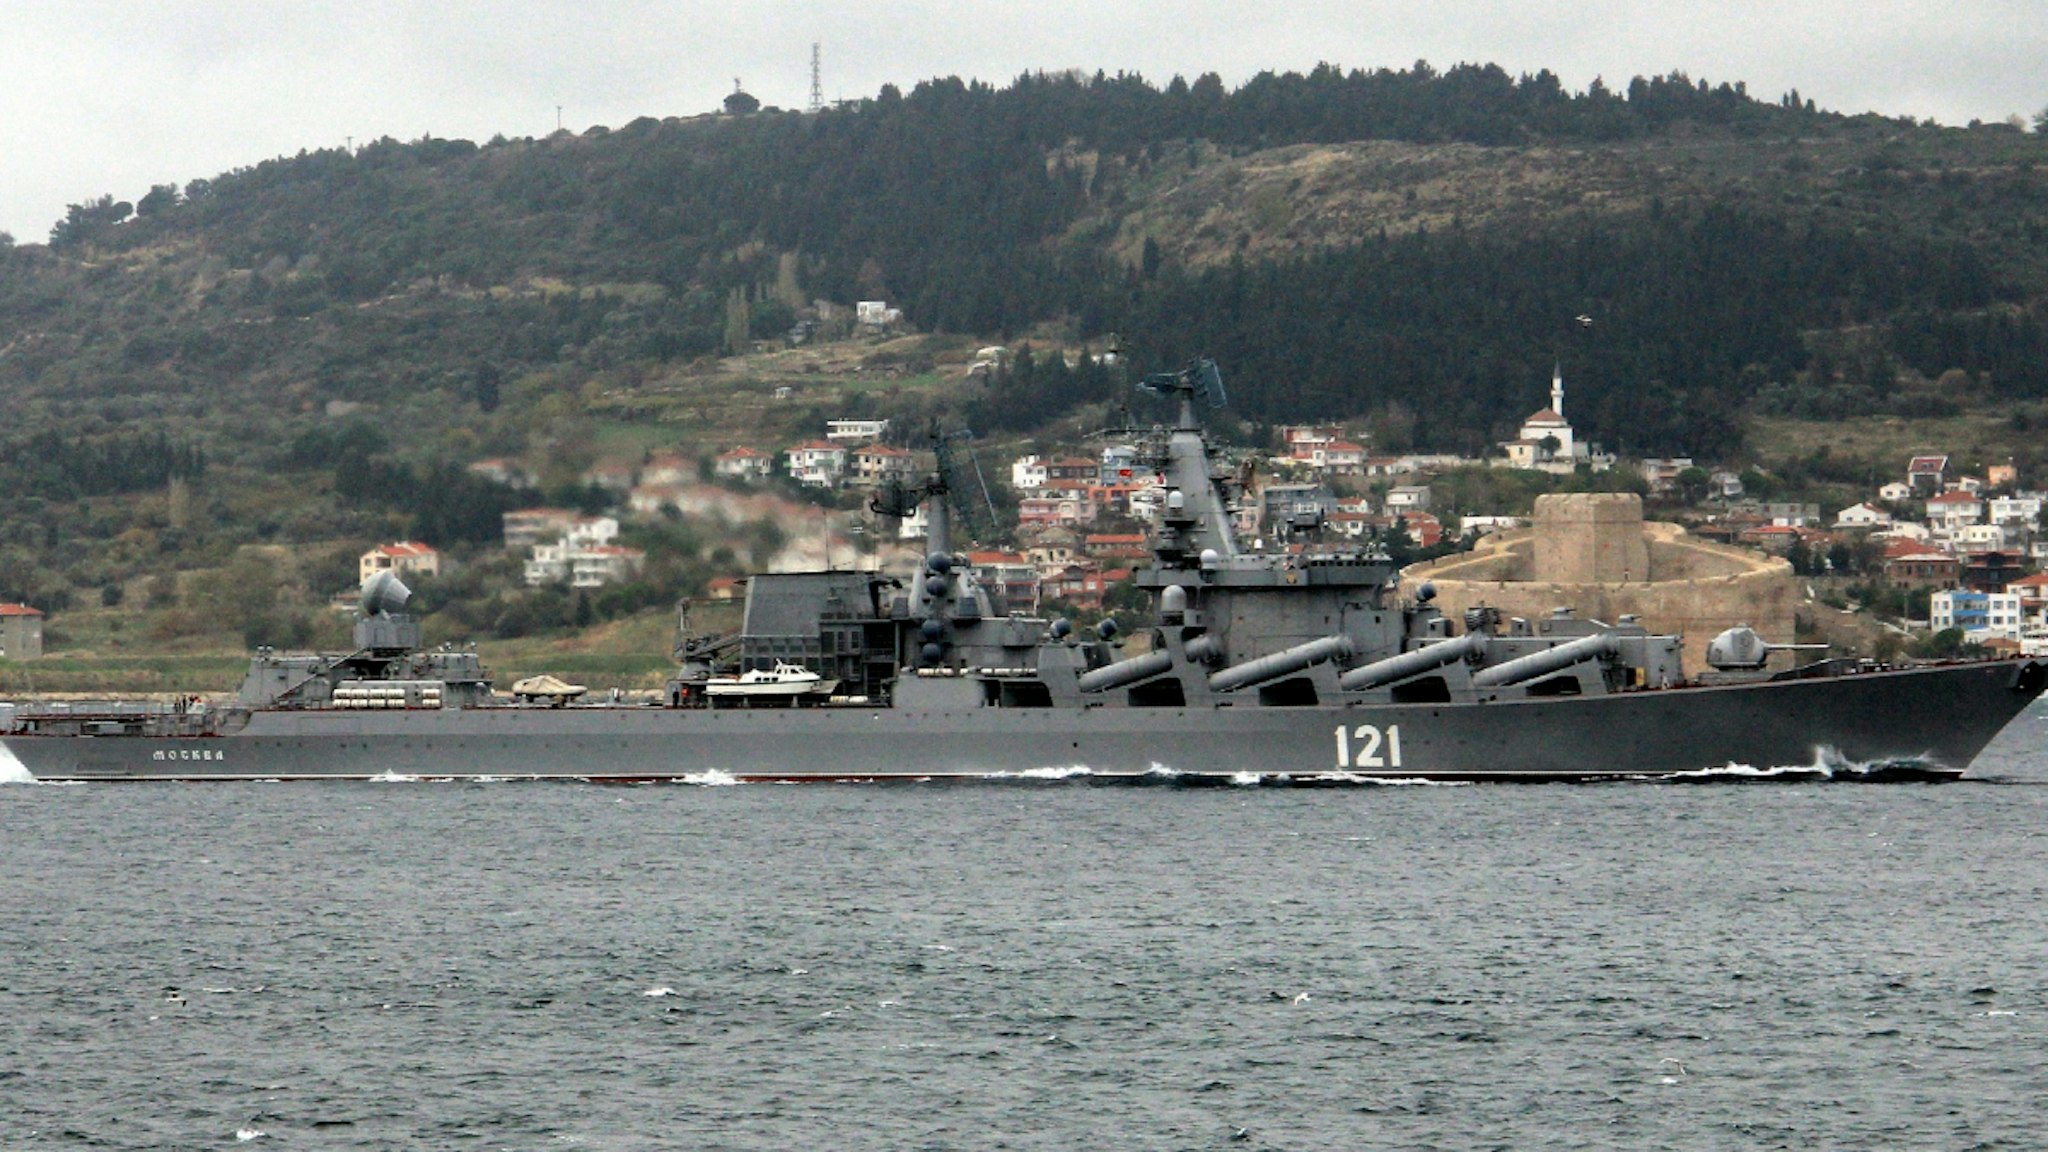 CANAKKALE, TURKIYE - (ARCHIVE): A file photo dated November 15, 2013 shows guided missile cruiser of the Russian Navy, Moskva, passing through the Dardanelles strait in Canakkale, Turkey. On 14th April 2022 the Russian Defense Ministry says fire had broken out on the Moskva. "As a result of a fire, ammunition exploded on the Moskva missile cruiser. The ship was seriously damaged. The crew was completely evacuated", the ministry said in a statement. Late Wednesday 13th April, Maksym Marchenko, the head of Ukraine's Odessa Regional Military Administration, said the Ukrainian military had struck the warship with two Neptune class anti-ship missiles, causing severe damage. On 14th April, Russia's defence ministry said that the ship had sunk "in stormy seas" while being towed to port.